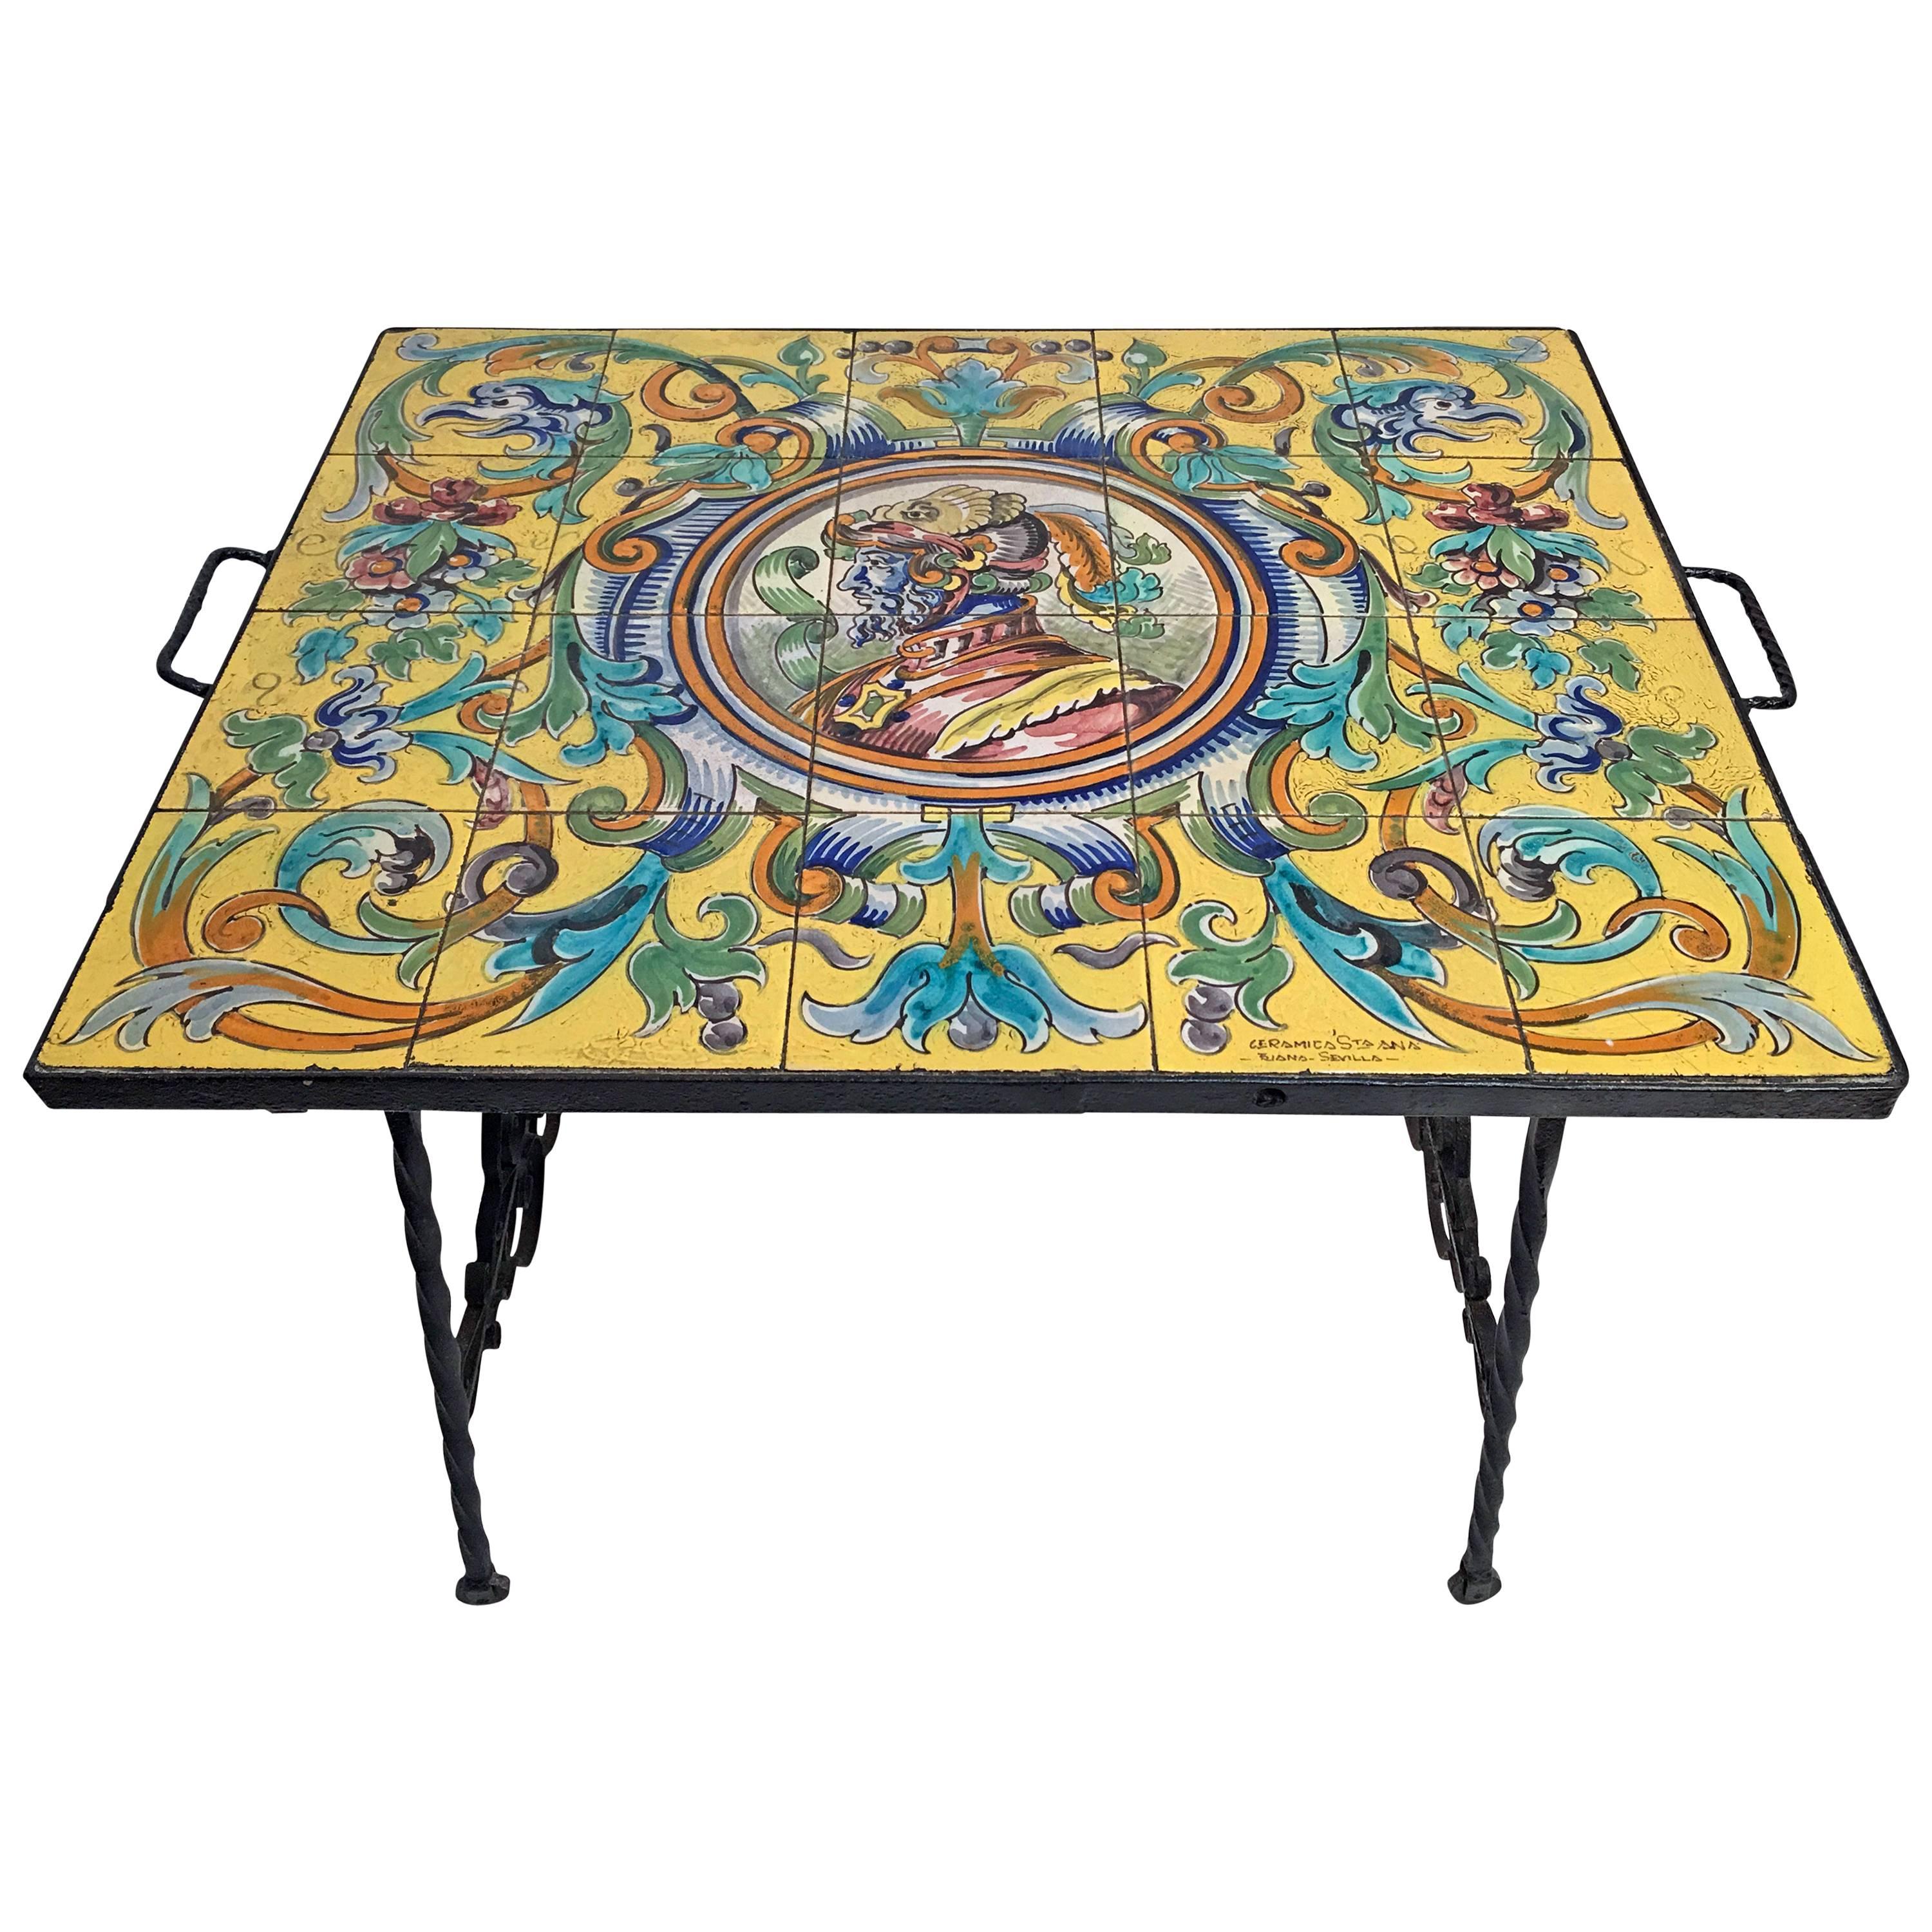 Hand-Wrought Iron Table with Spanish Ceramic Tile Top